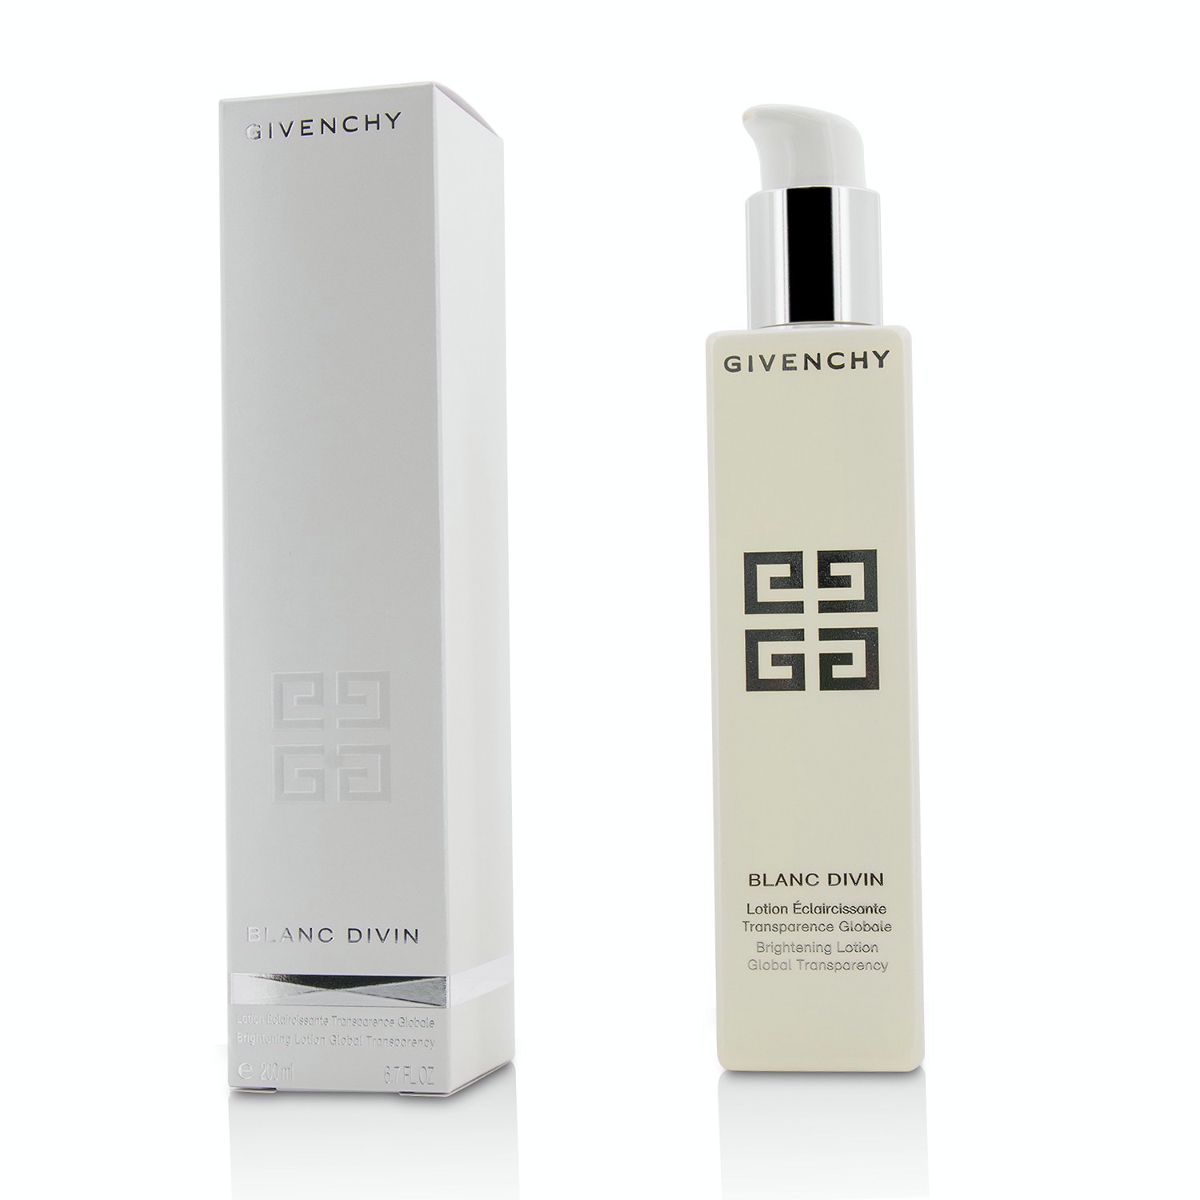 Blanc Divin Brightening Lotion Global Transparency Givenchy Image